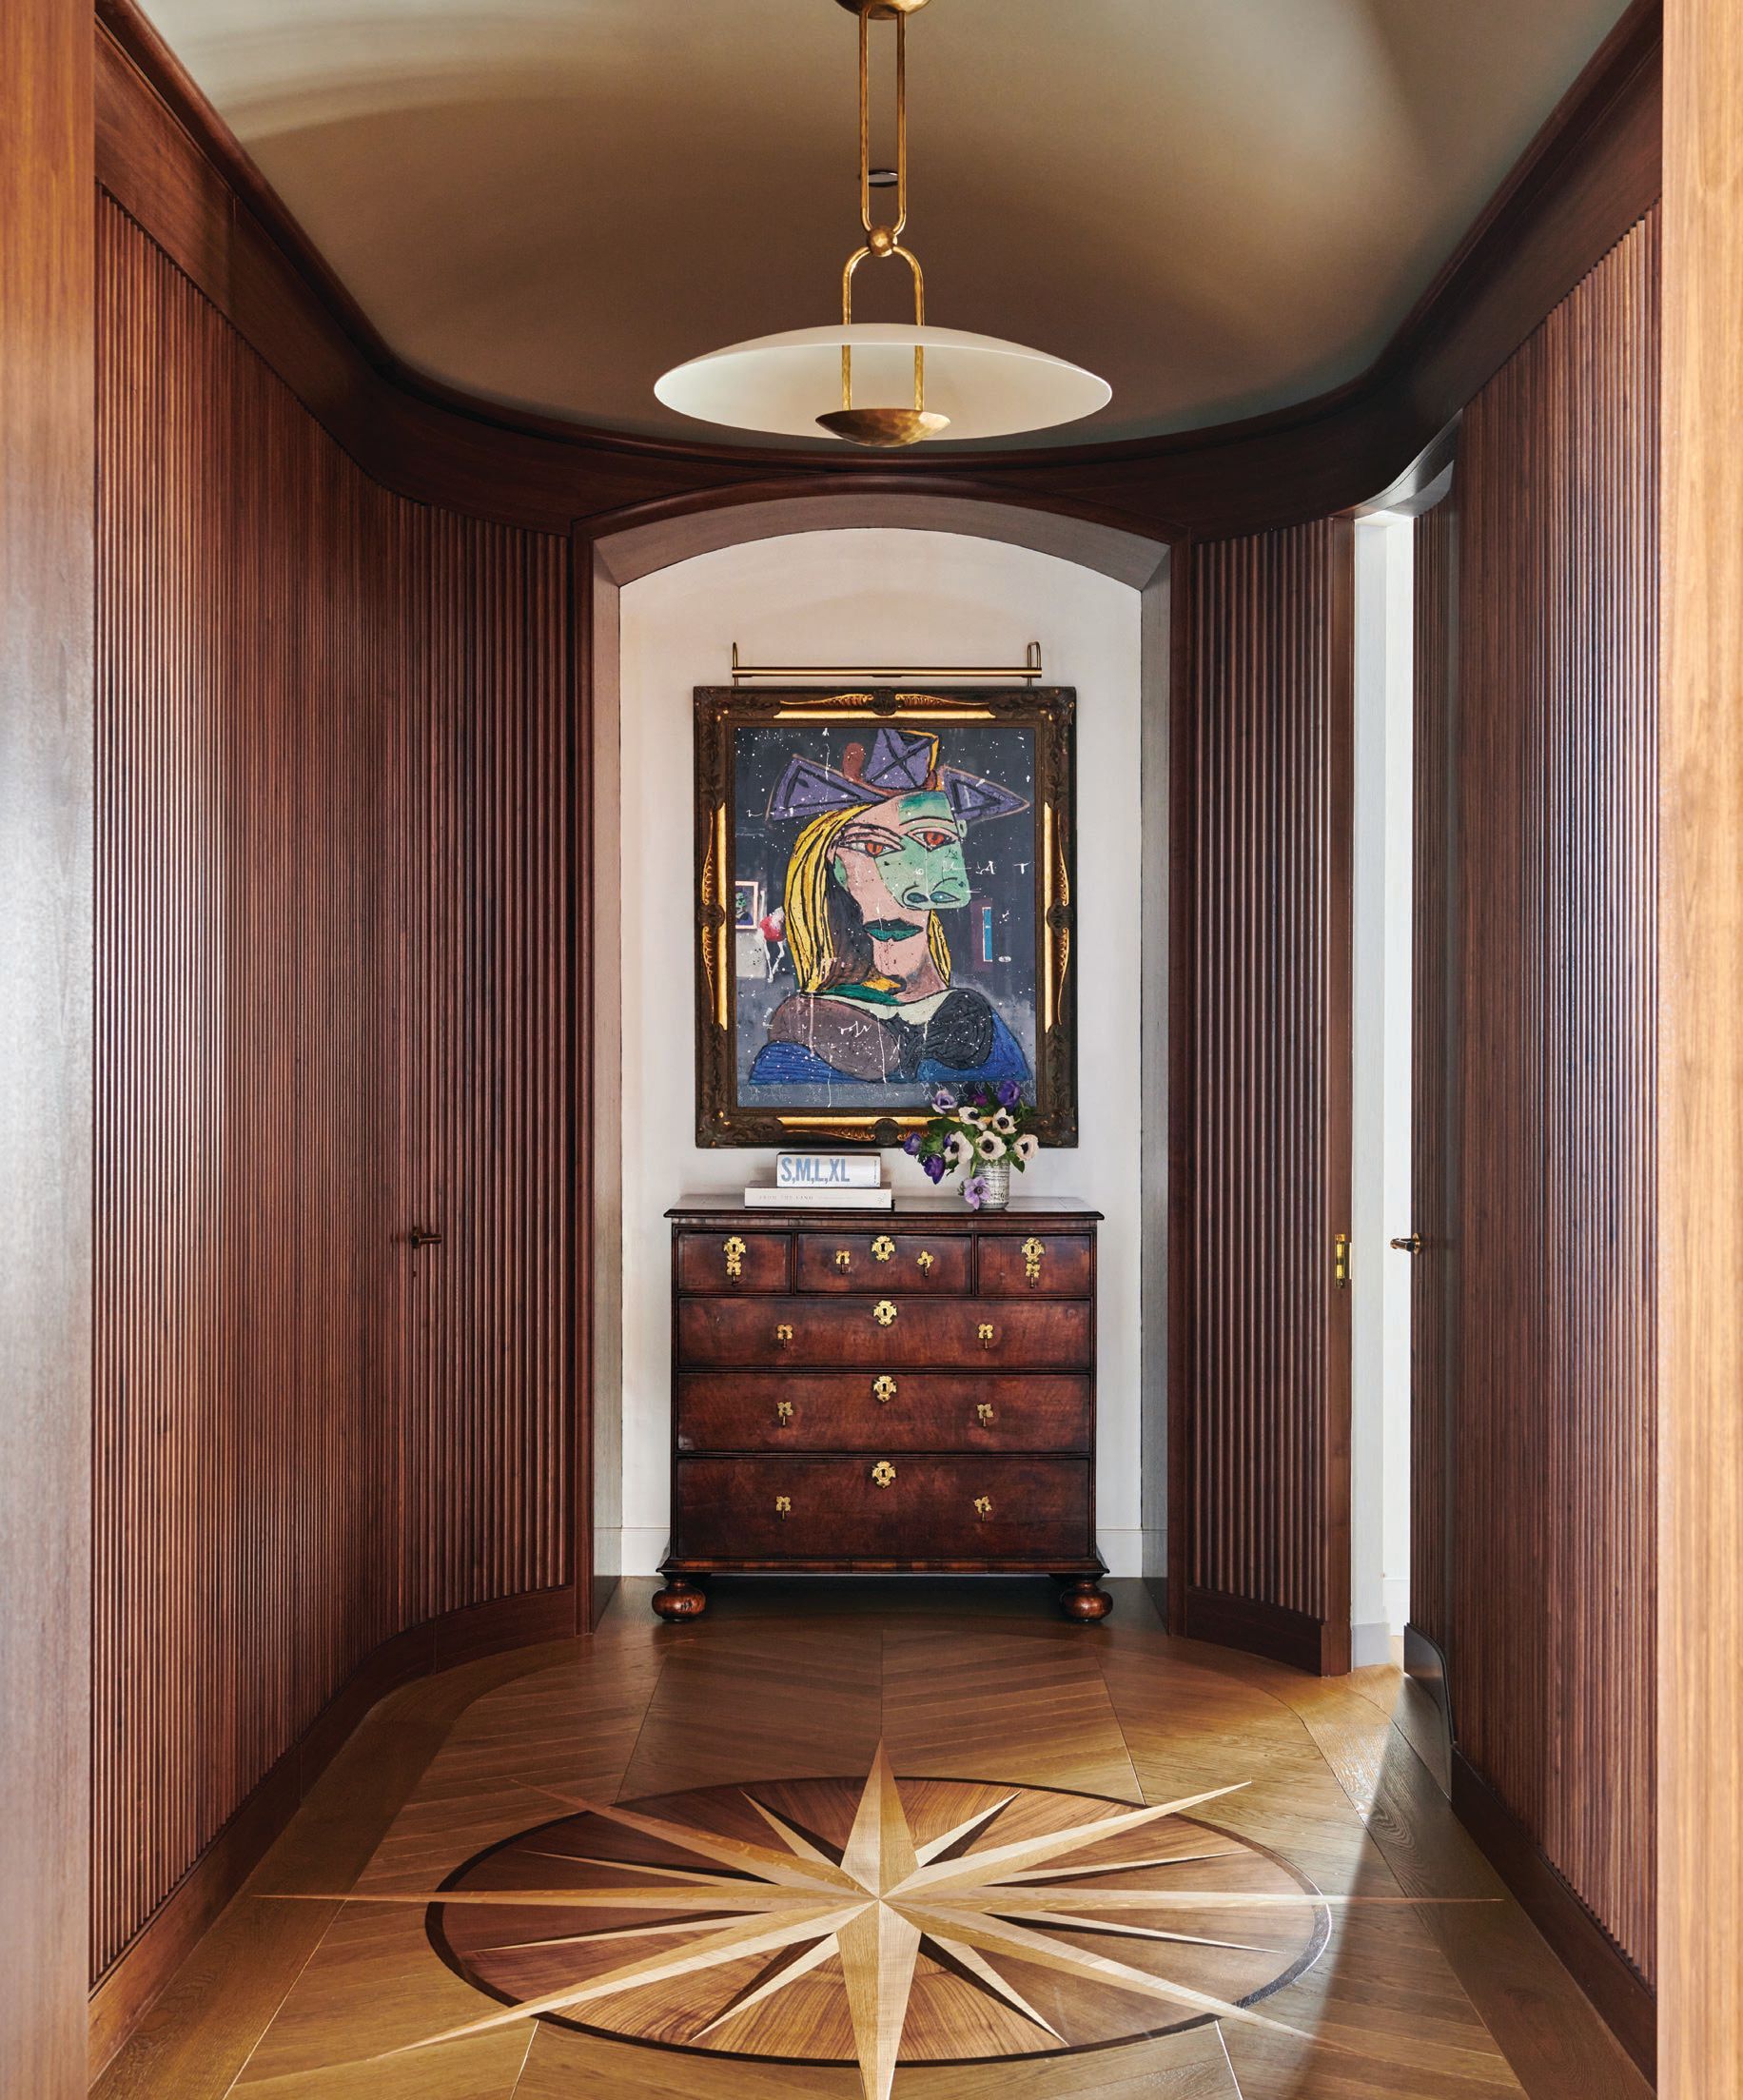 The home's east rotunda dazzles with wood paneling produced by Exclusive Woodworking and an eyecatching star floor design produced by Apex Wood Floors—both custom designed by Soucie Horner—along with the client's own credenza and a Picasso-influenced artwork by Angelo Accardi. Photographed by Richard Powers